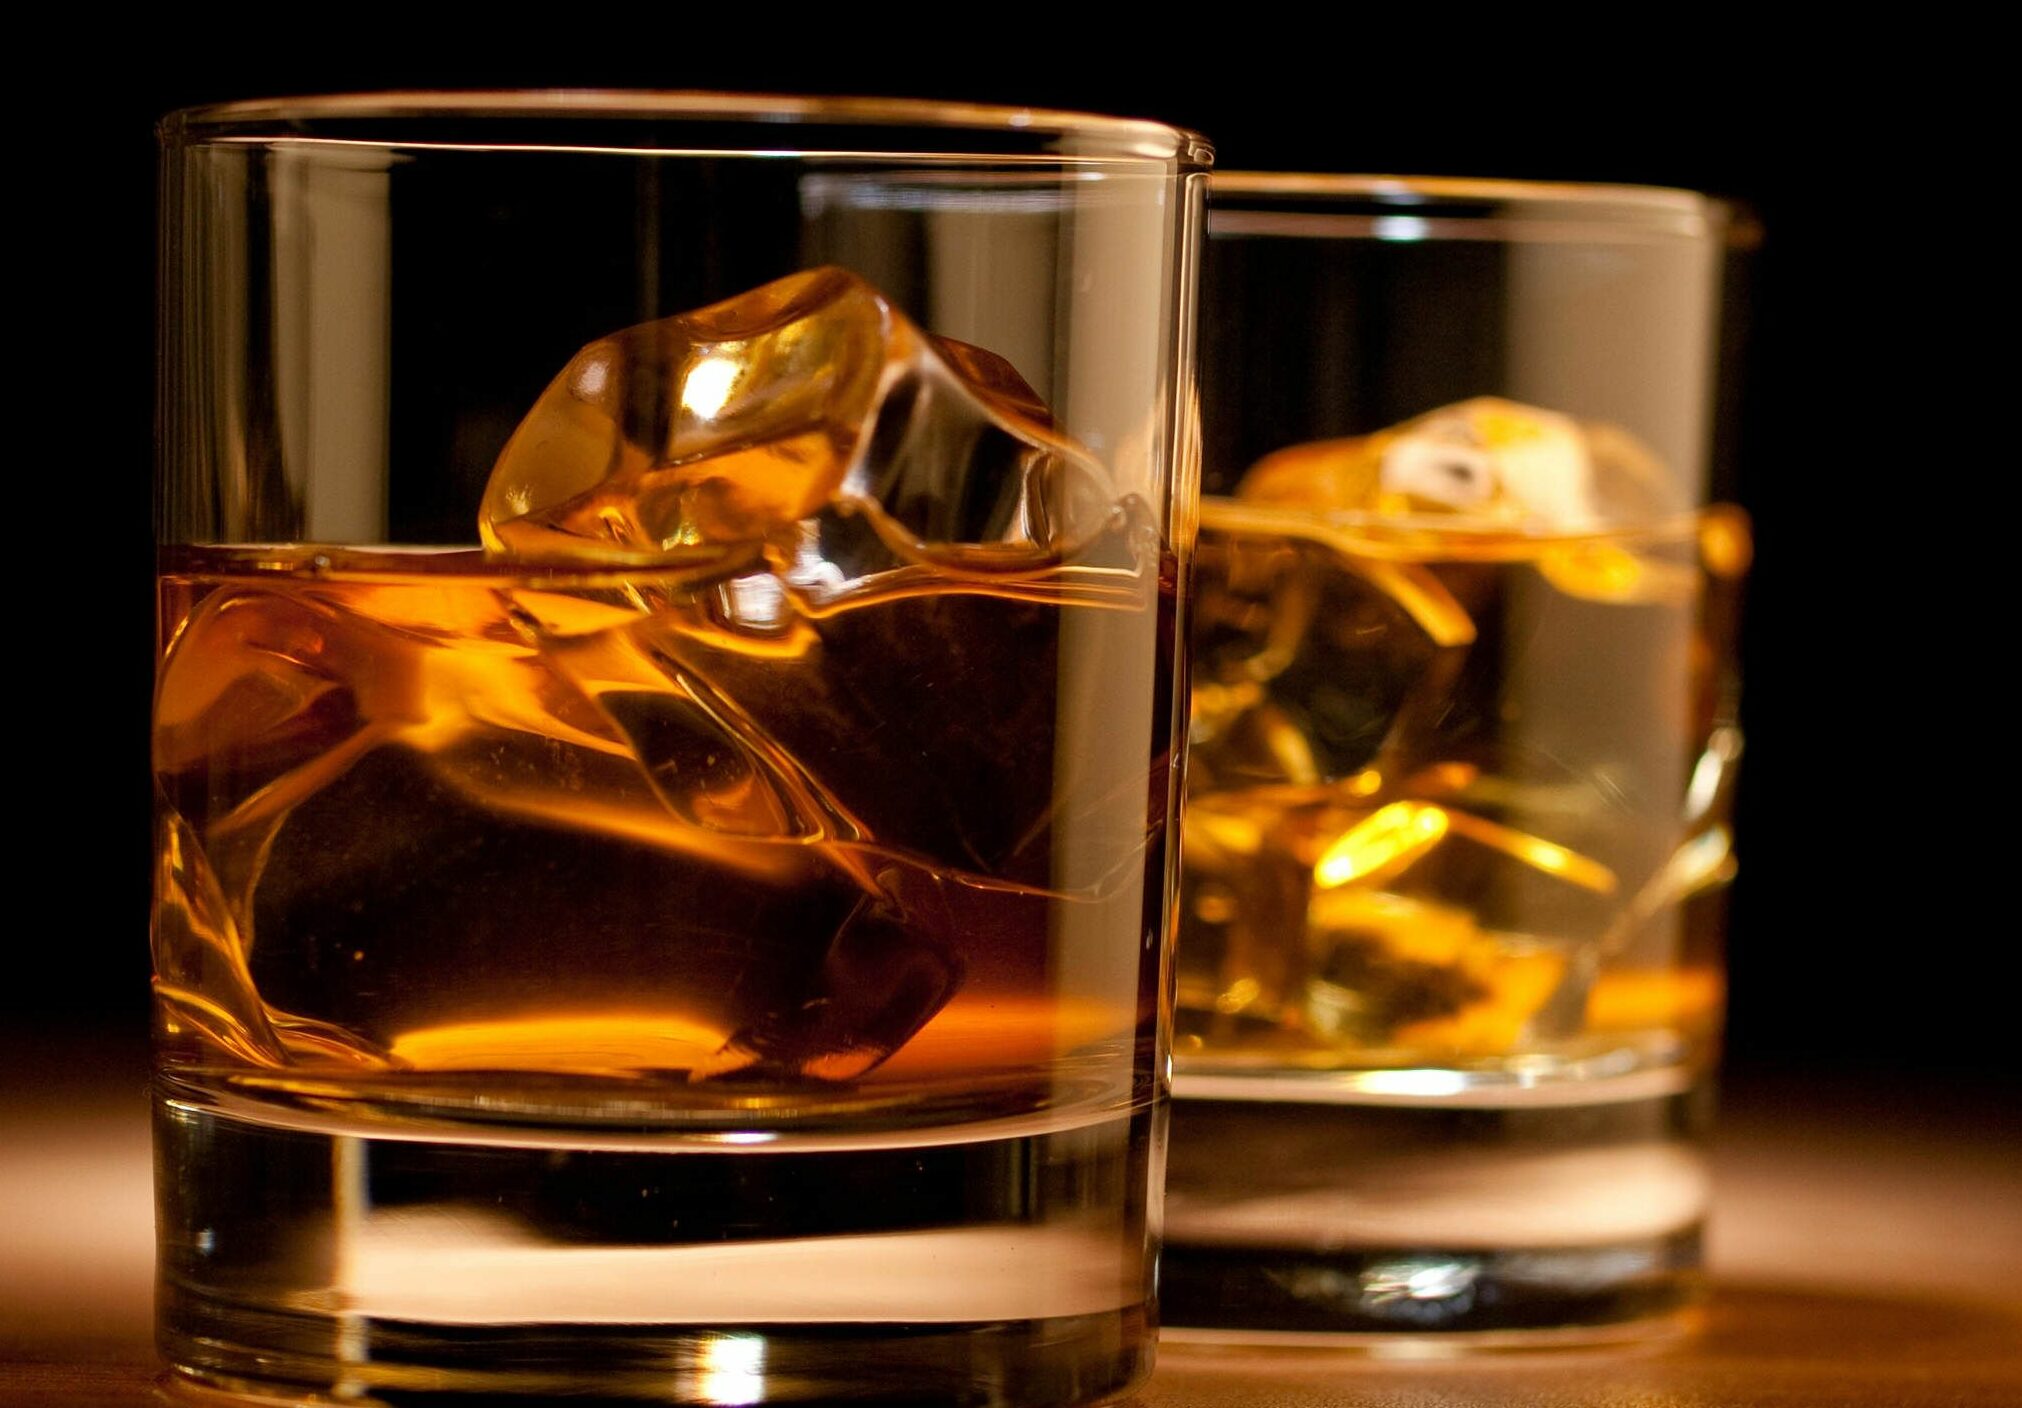 What’s The Difference Between American Whiskey and Scottish Whisky? – Here’s What Study Analyzed